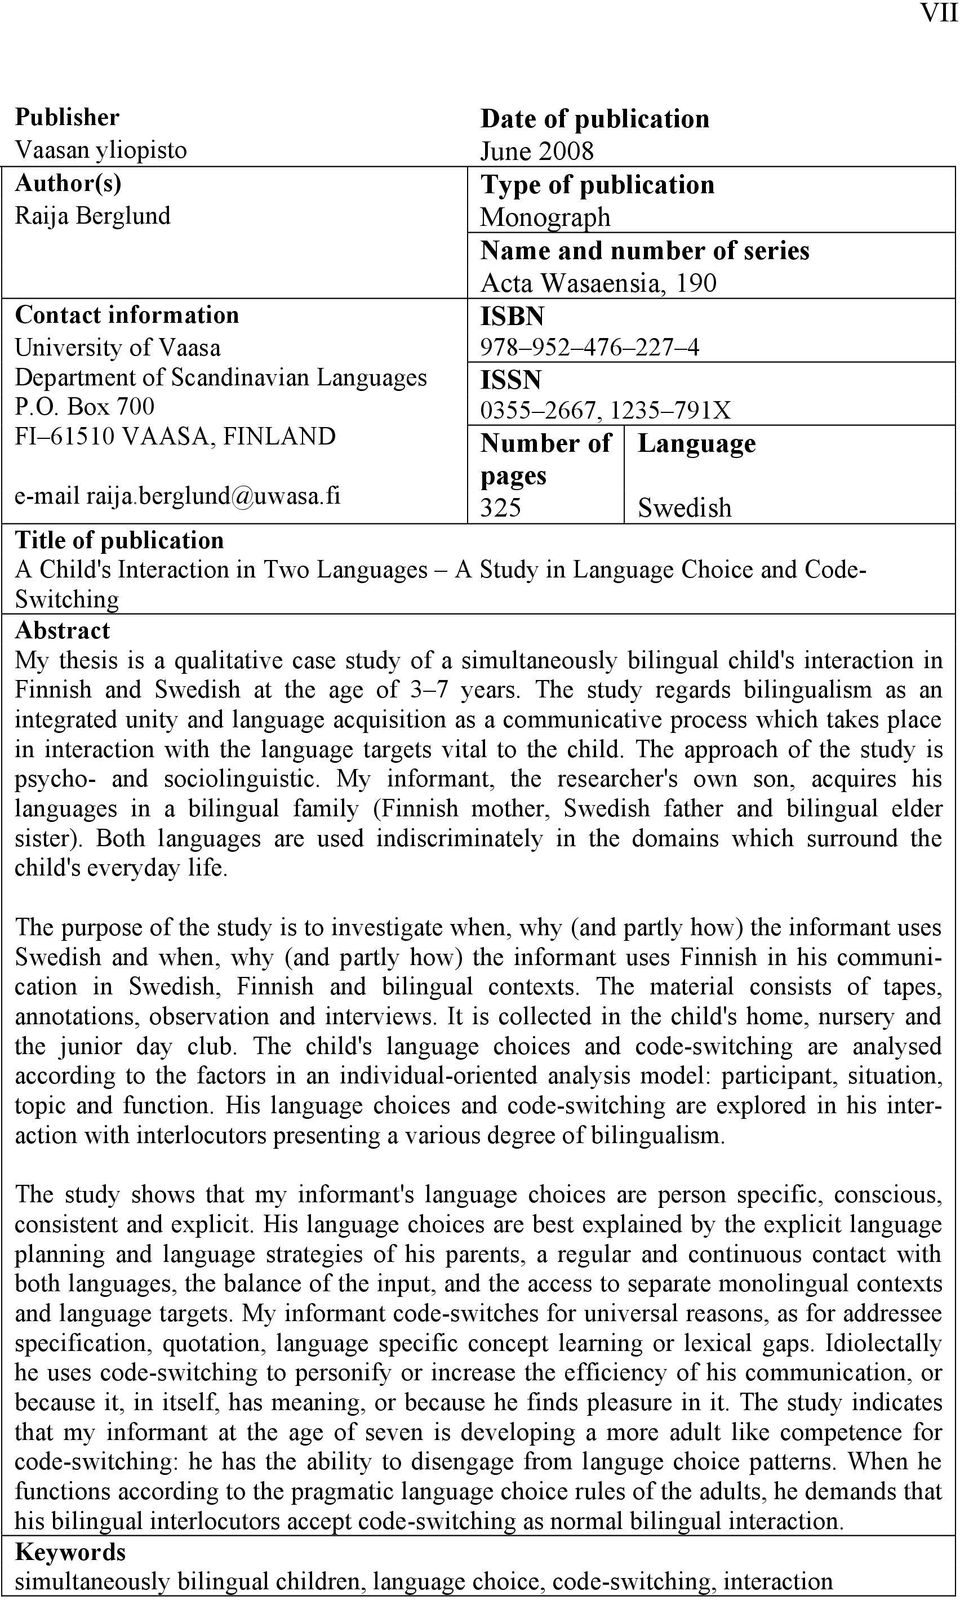 fi pages 325 Swedish Title of publication A Child's Interaction in Two Languages A Study in Language Choice and Code- Switching Abstract My thesis is a qualitative case study of a simultaneously